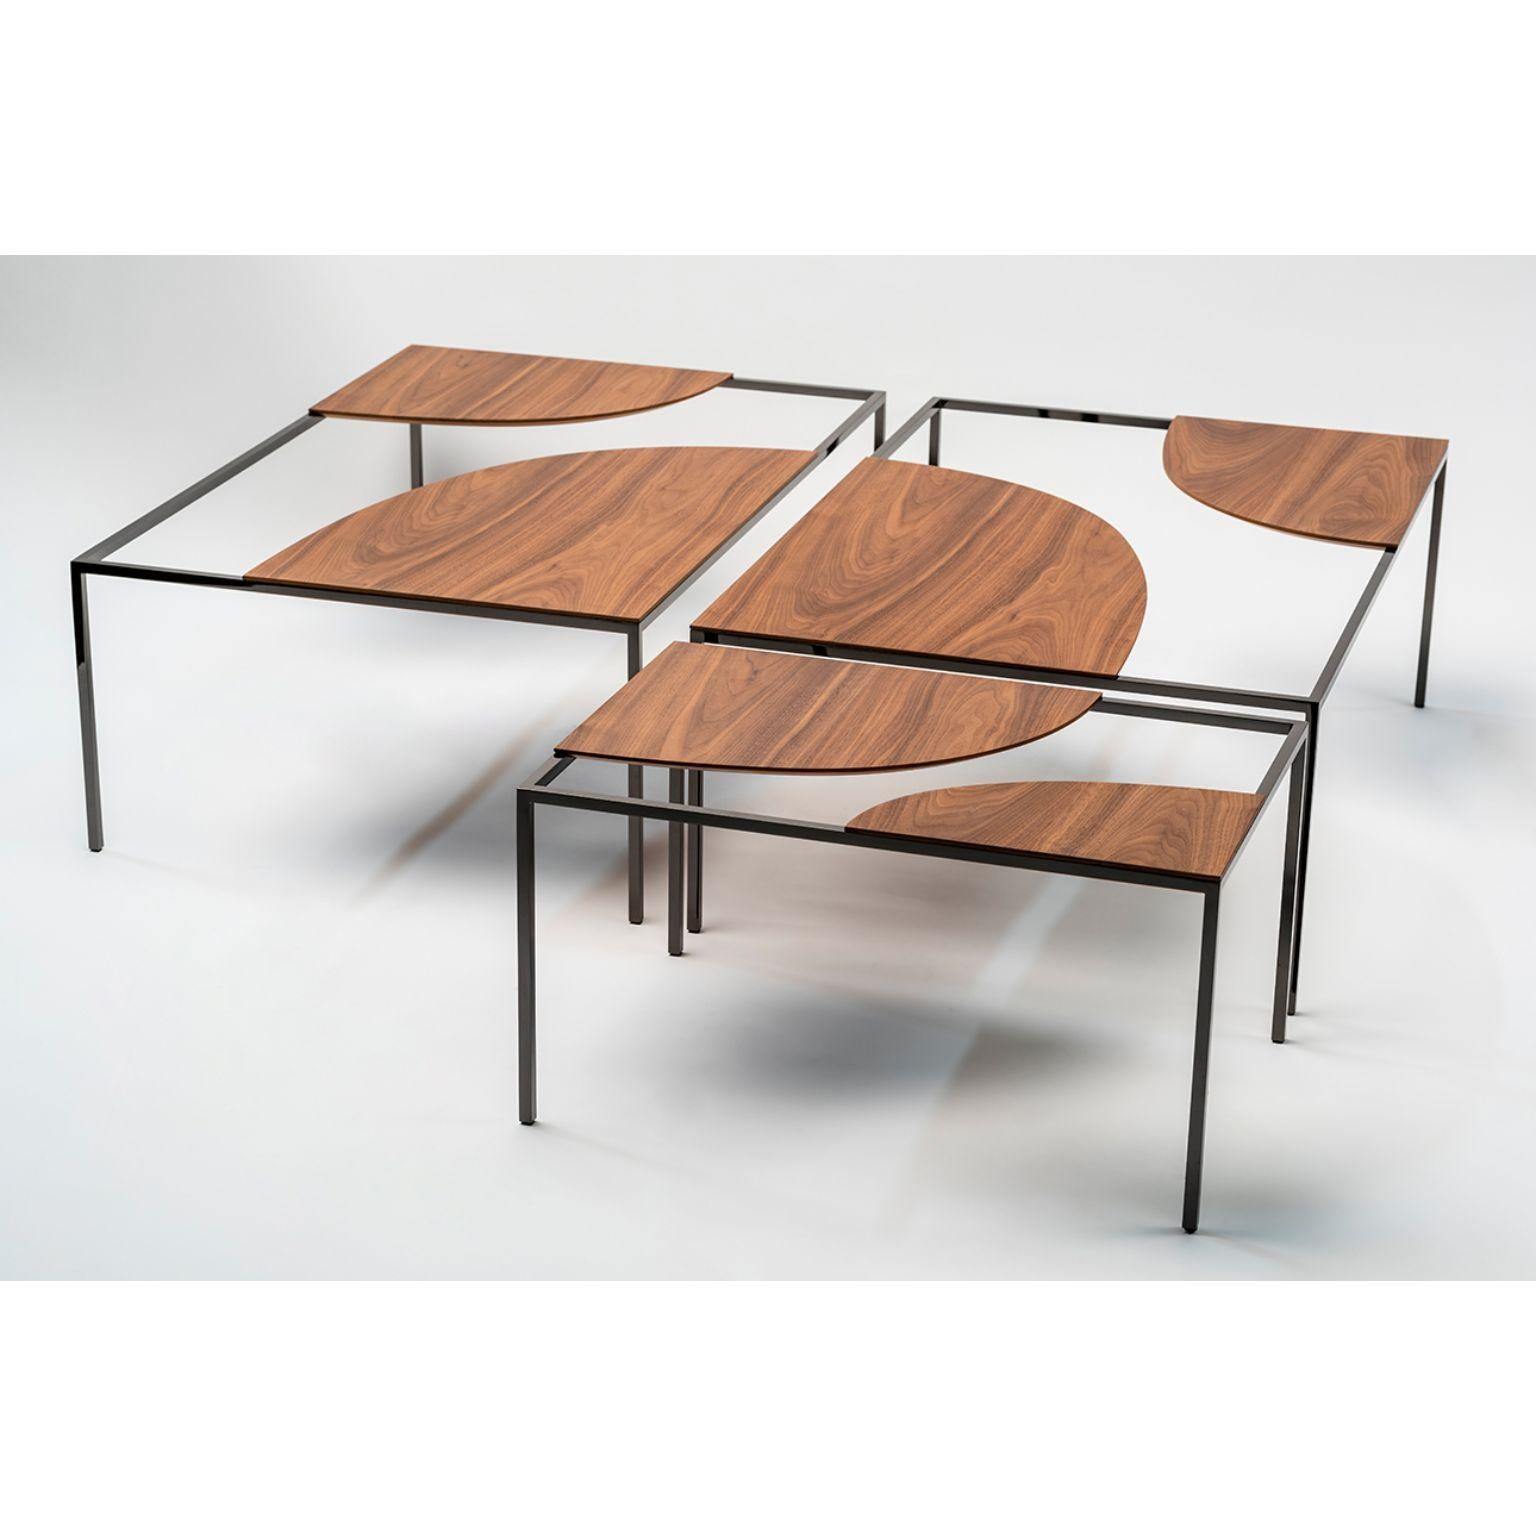 Set of 3 creek coffee table by Nendo
Materials: Top: solid wood (Also available in powder coated metal)
Structure: Black chrome metal
Dimensions: W 90 x D 60 x H 31.7 cm
W 60 x D 60 x H 31.7 cm

Creek is a table that suggests a stream of water